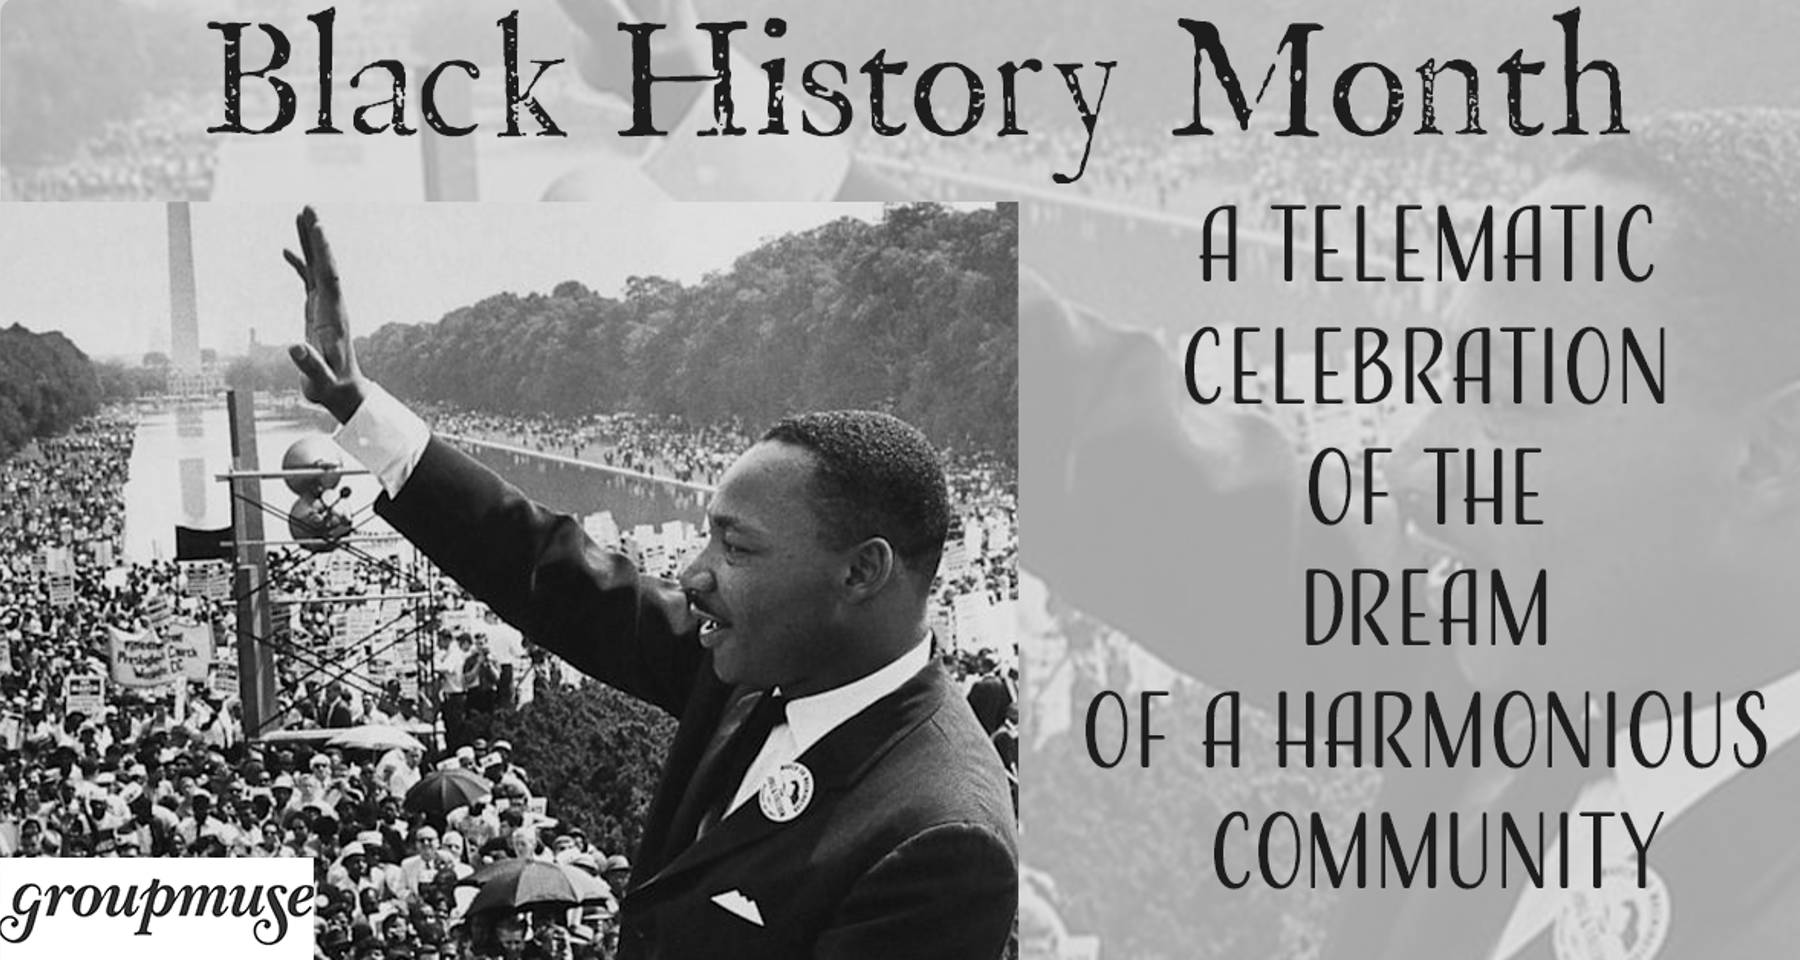 Black History Month - a telematic celebration of the Dream of a Harmonious Community with Martin Luther King Jr.